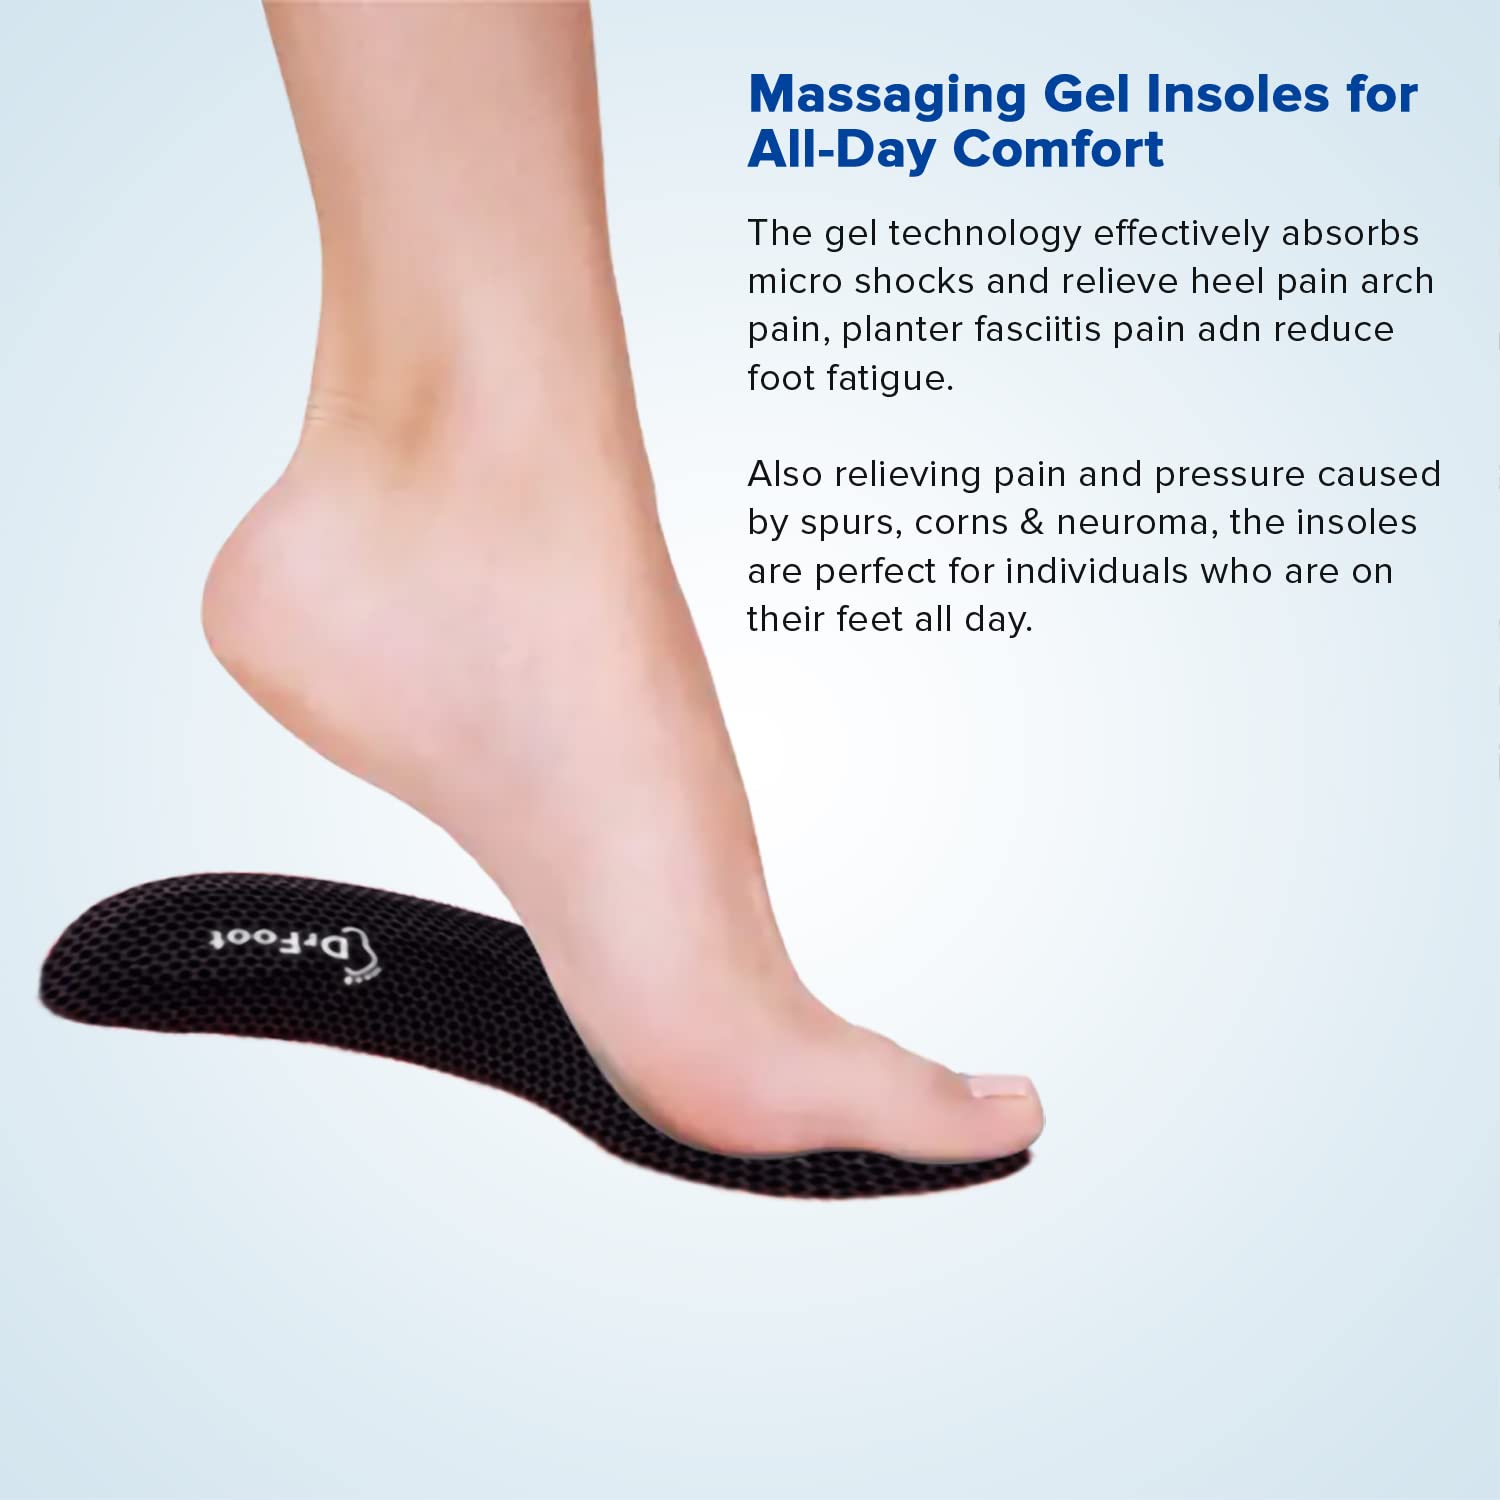 Silicone Gel Heel Cups - Shoe Inserts For Plantar Fasciitis, Sore Heel Pain,  Bone Spur & Achilles Pain - Pad & Shock Absorbing Support at Rs 149.00 |  Gel Heel Cups | ID: 2849576469012